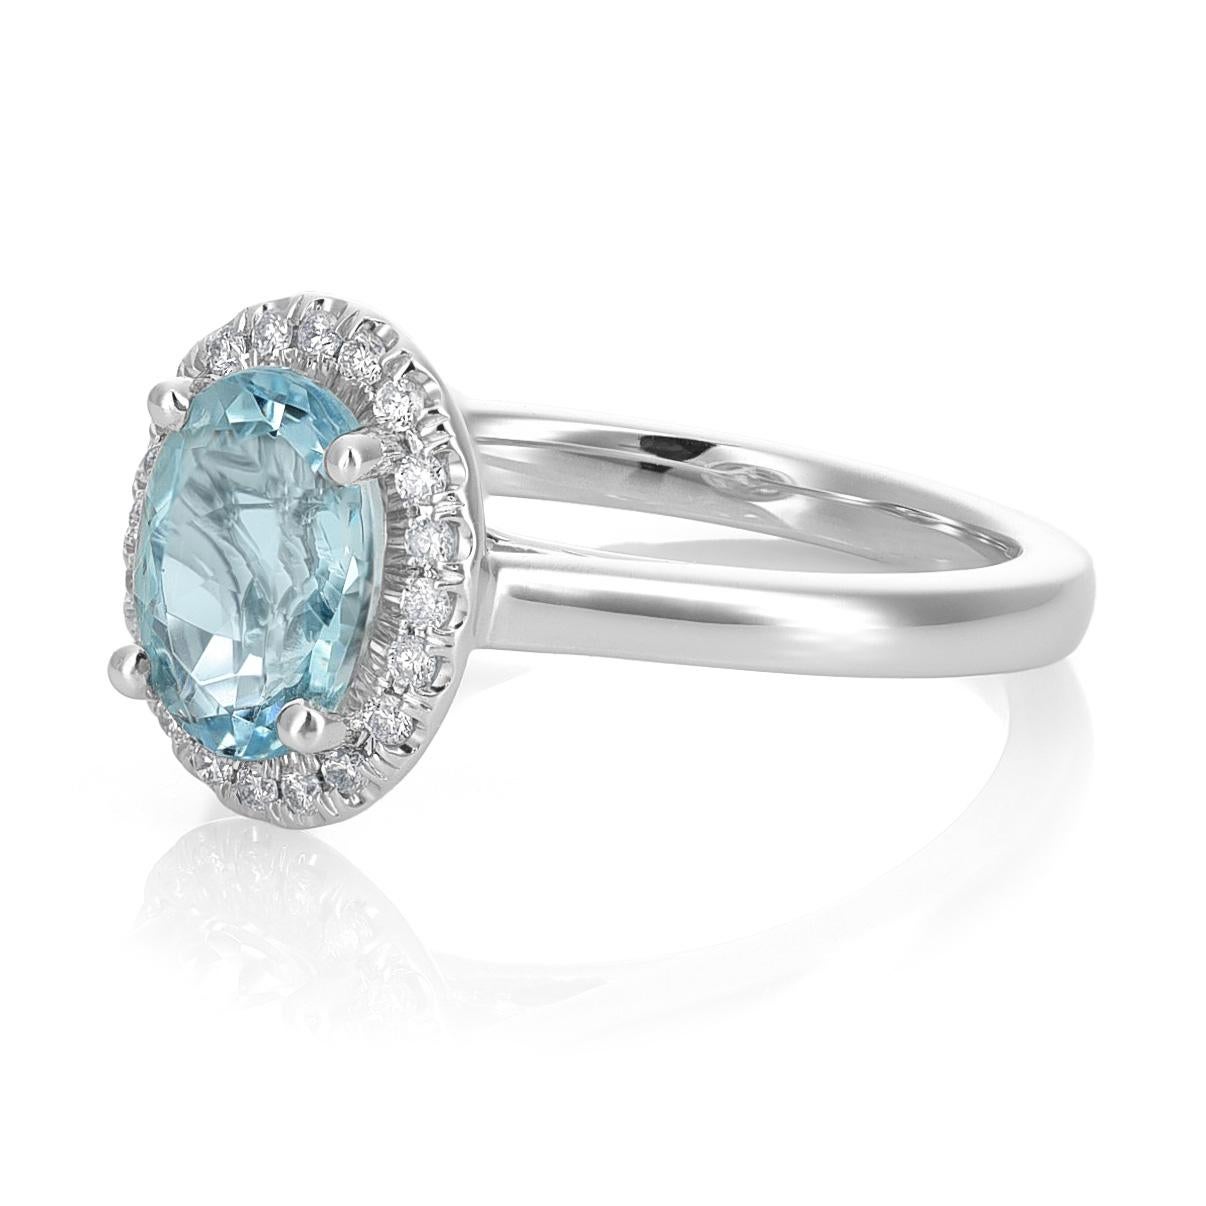 Presenting a captivating 14K White Gold Ring showcasing a splendid 1.66-carat oval-shaped Natural Aquamarine, adorned with the brilliance of 0.15 carats of Diamonds. This expertly crafted piece exudes timeless elegance, with the heated aquamarine